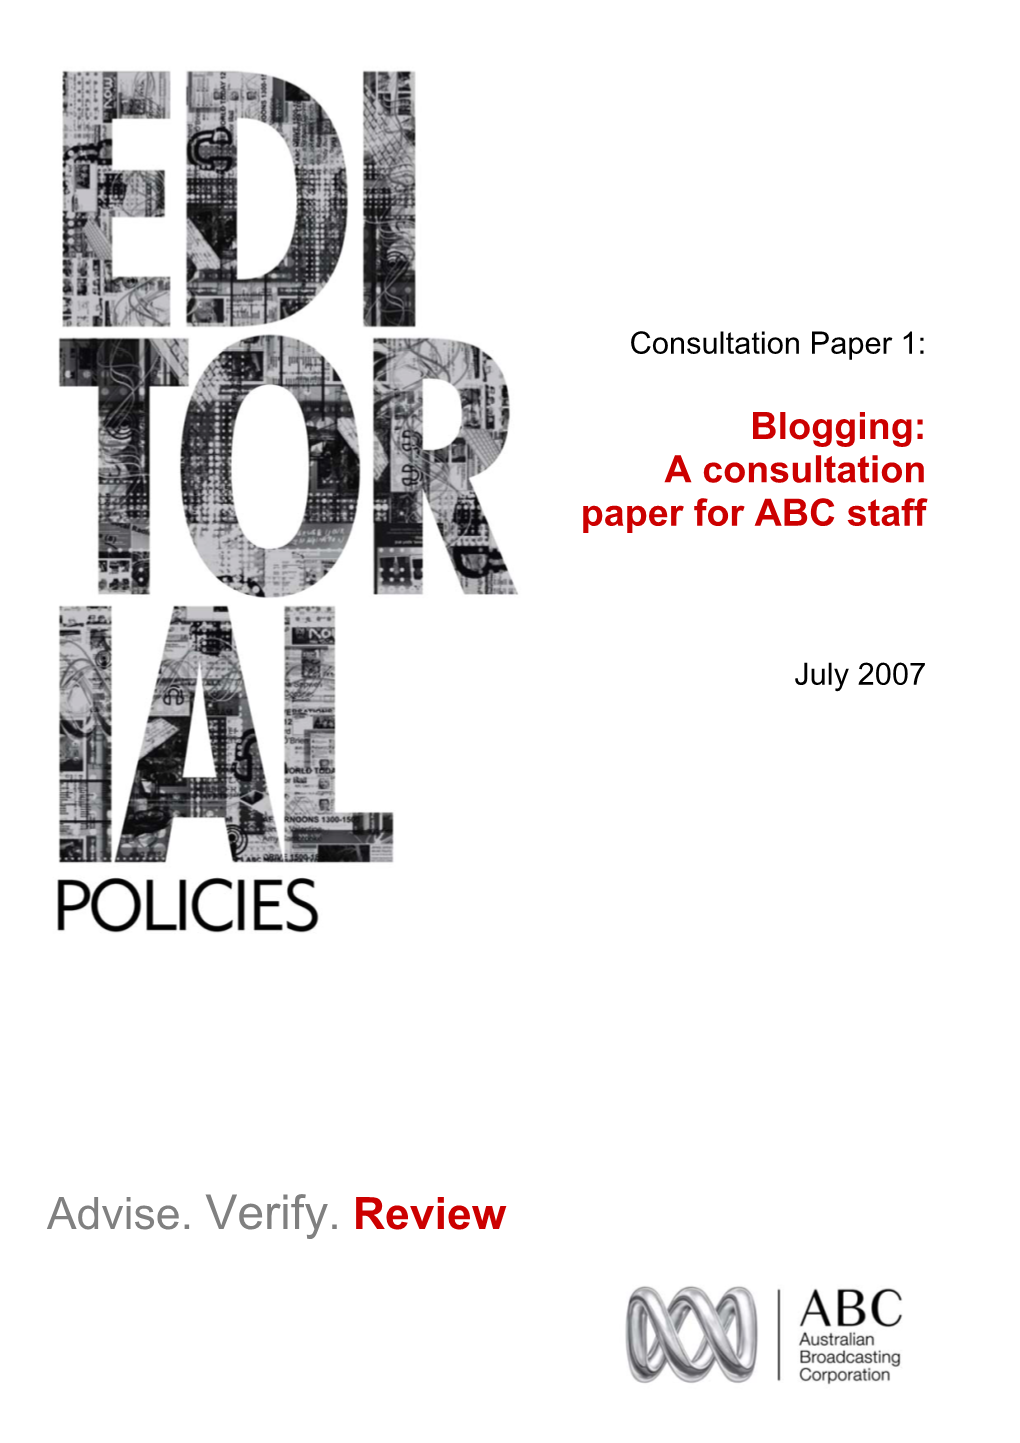 A Consultation Paper for ABC Staff